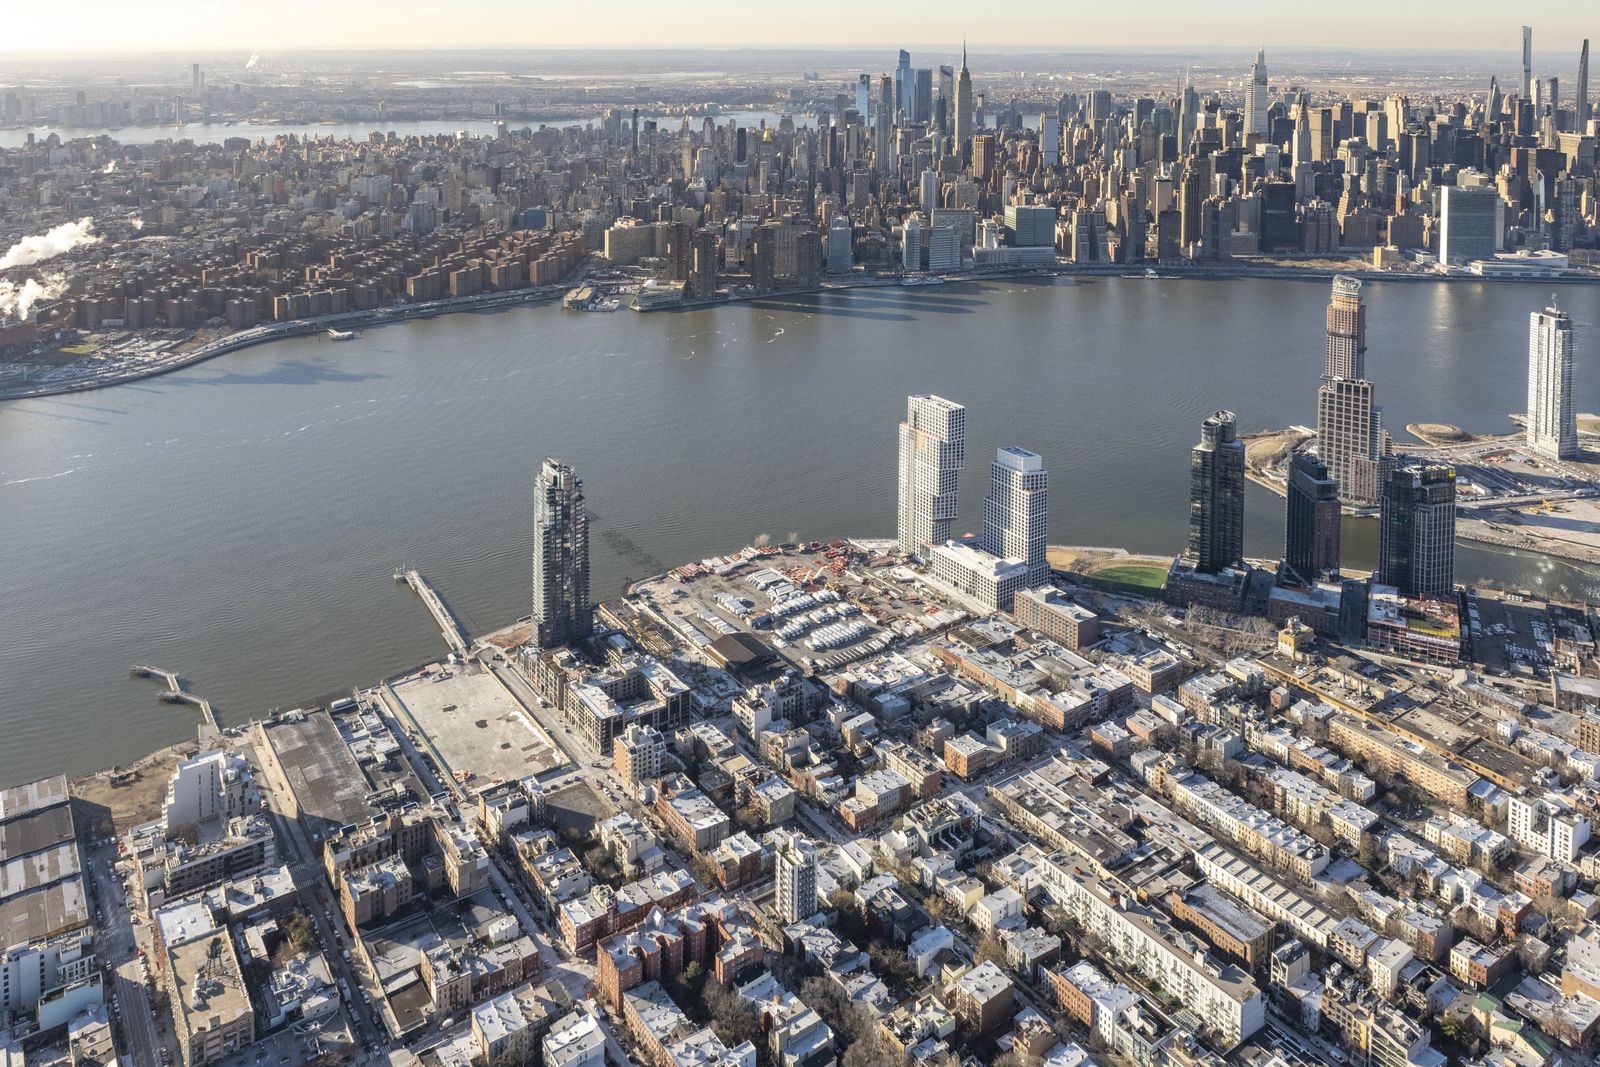 New York City is sinking—satellite data show that the metropolis is plunging 1 to 2 millimeters on average each year. Some of this is natural, such 